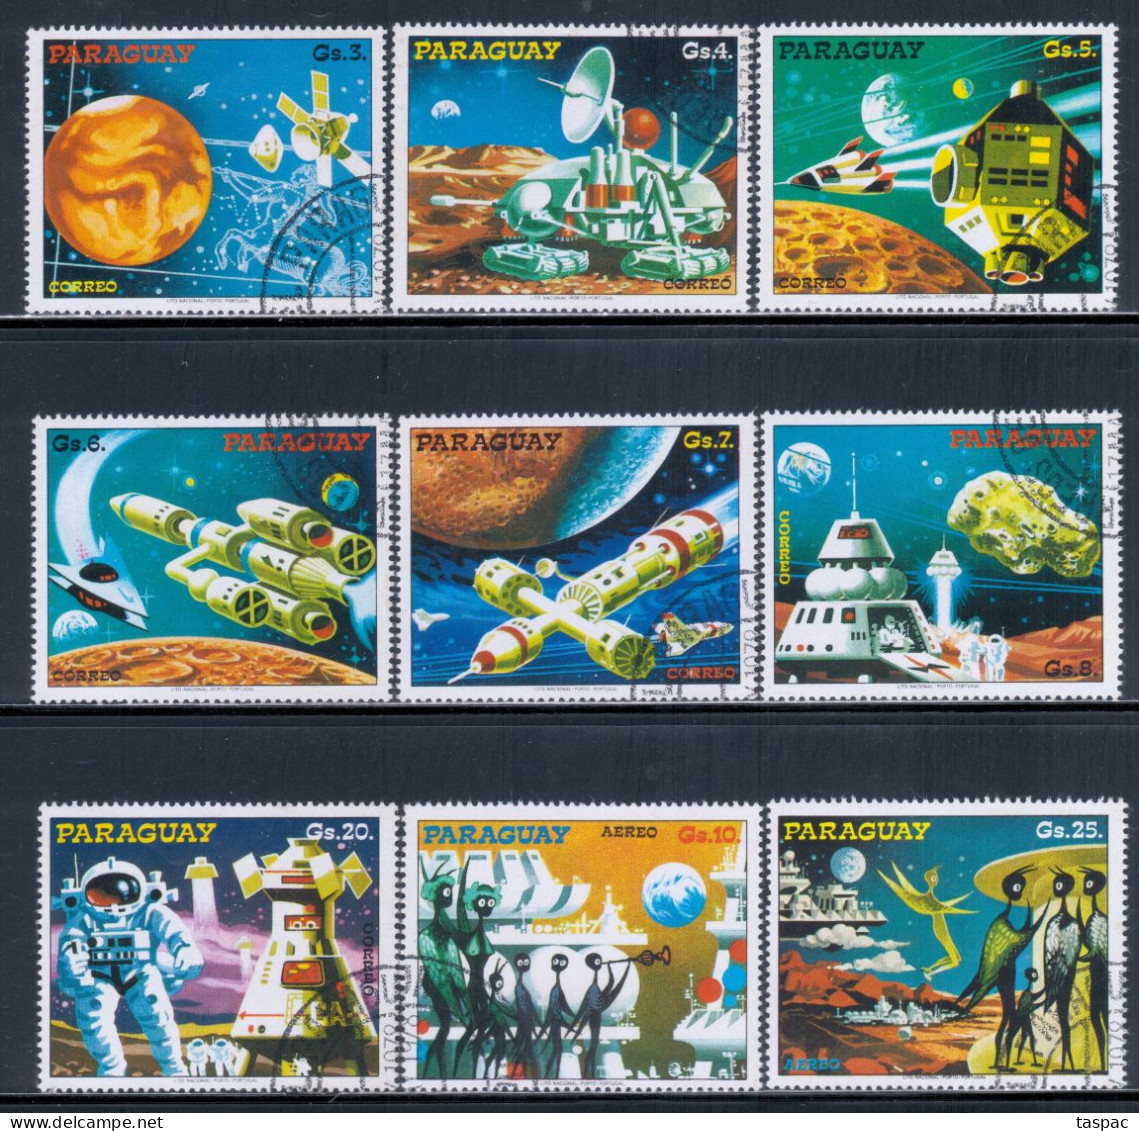 Paraguay 1978 Mi# 3051-3059 Used - Future Space Projects - Sud America